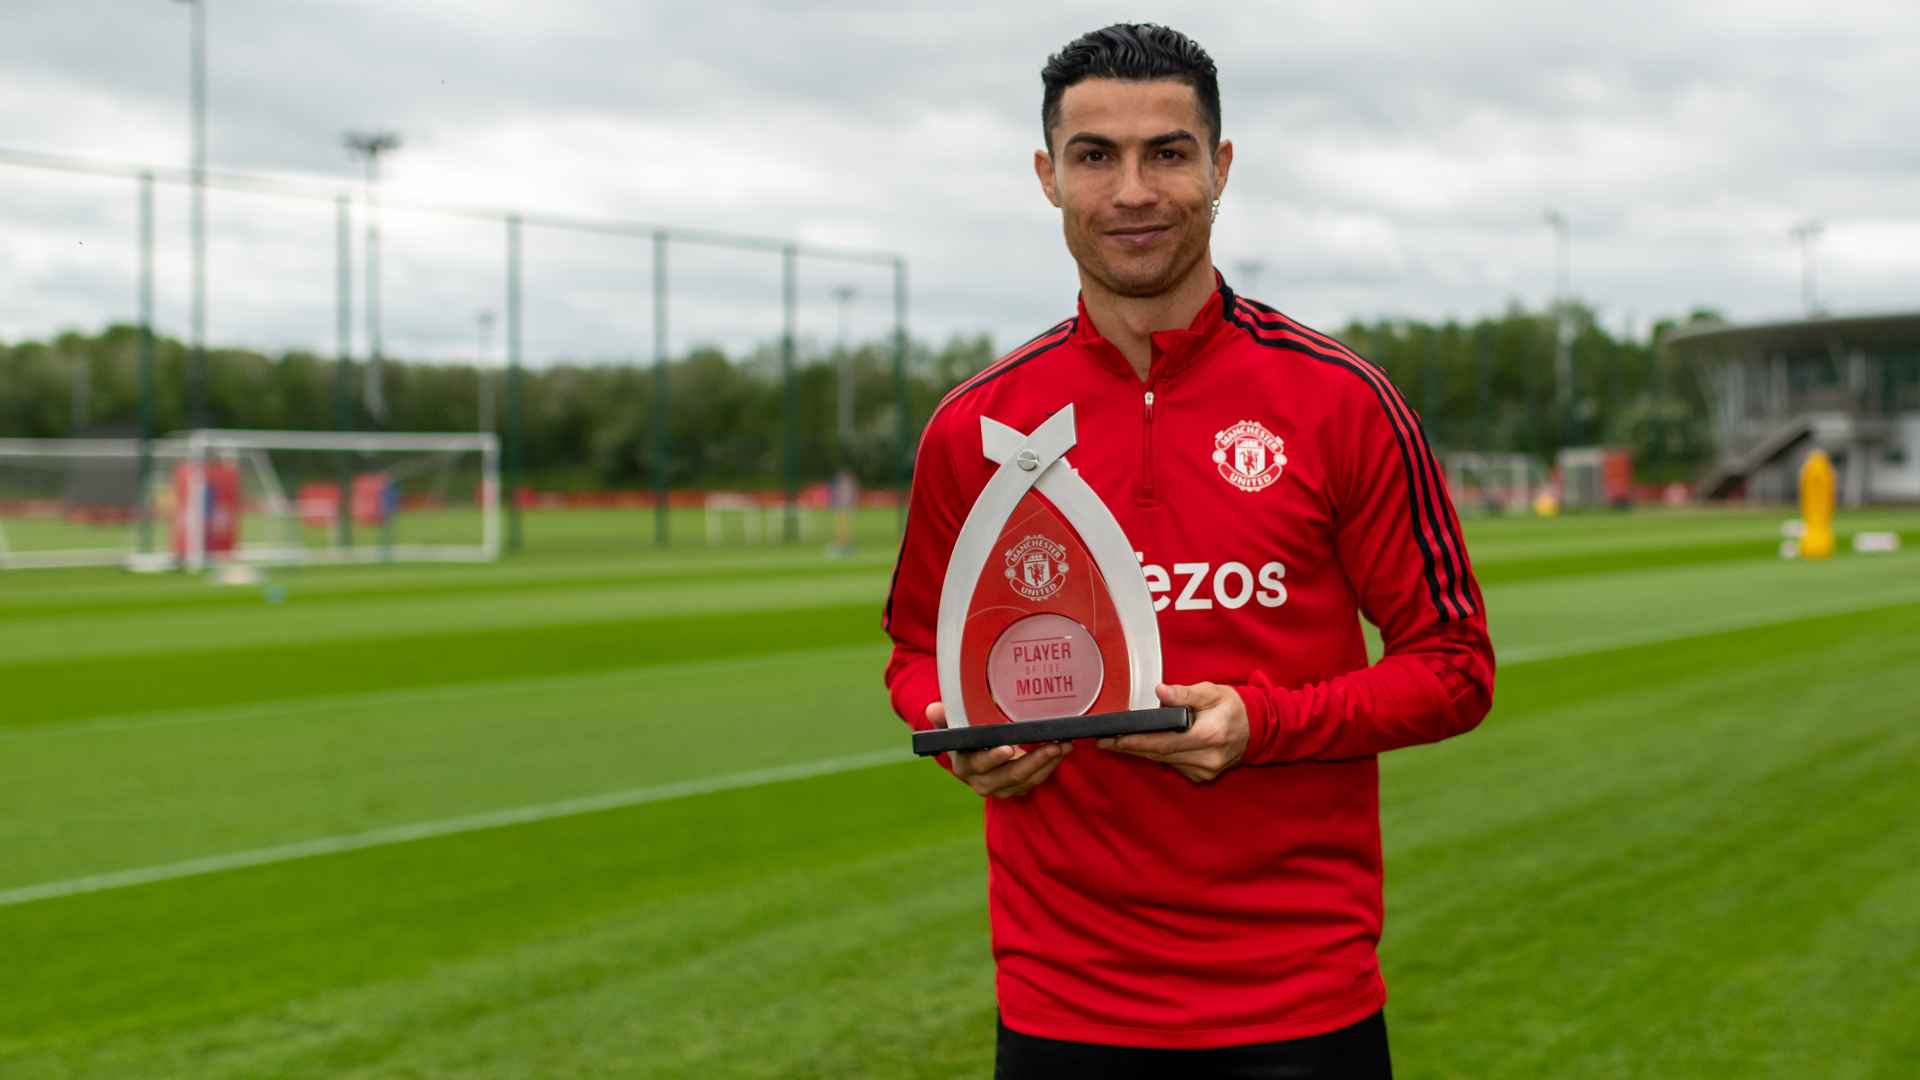 Manchester United's Player of the Month for May is Cristiano Ronaldo